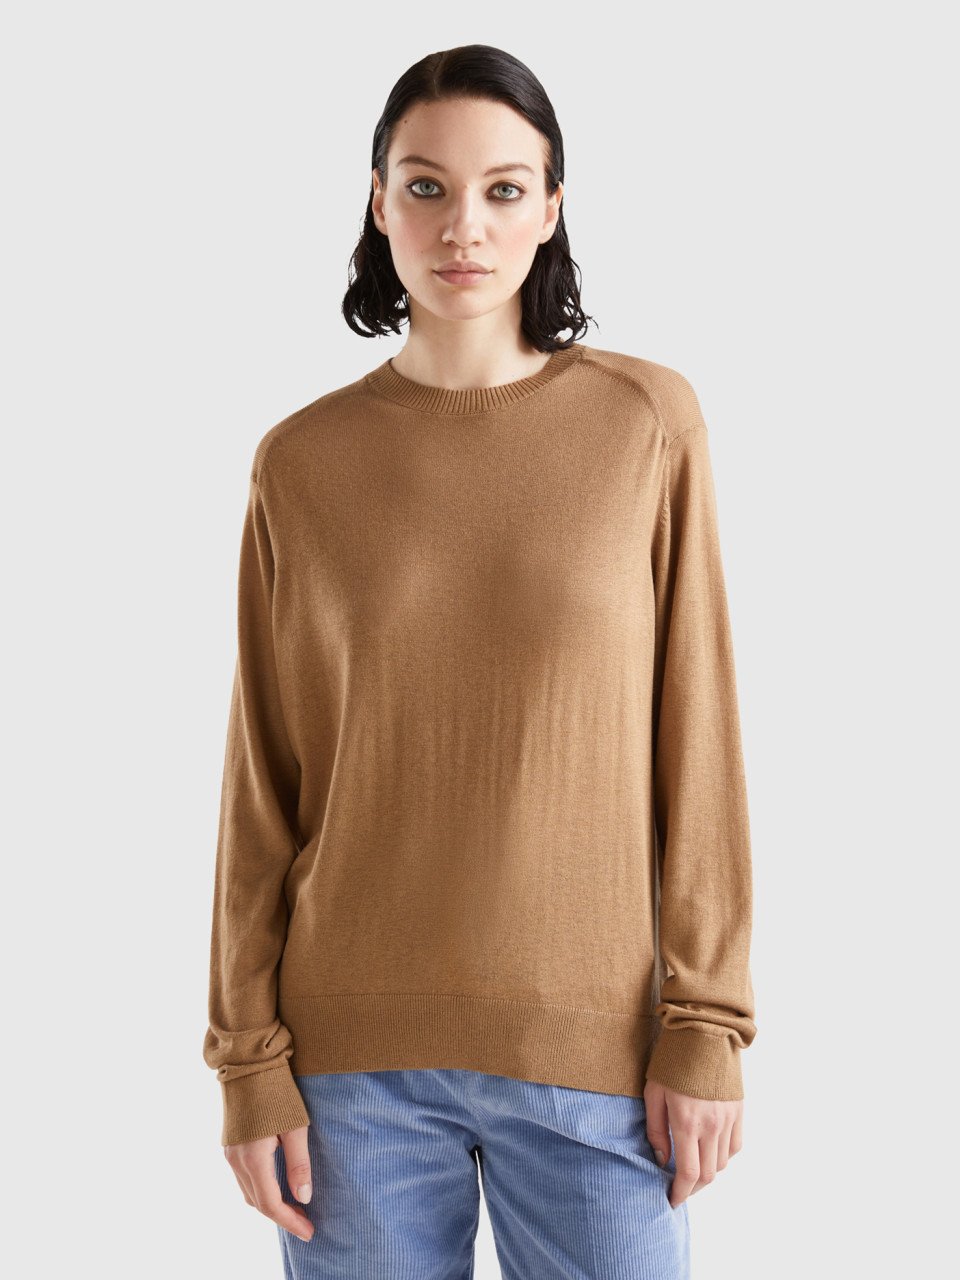 Benetton, Sweater In Viscose Blend With Slits, Camel, Women